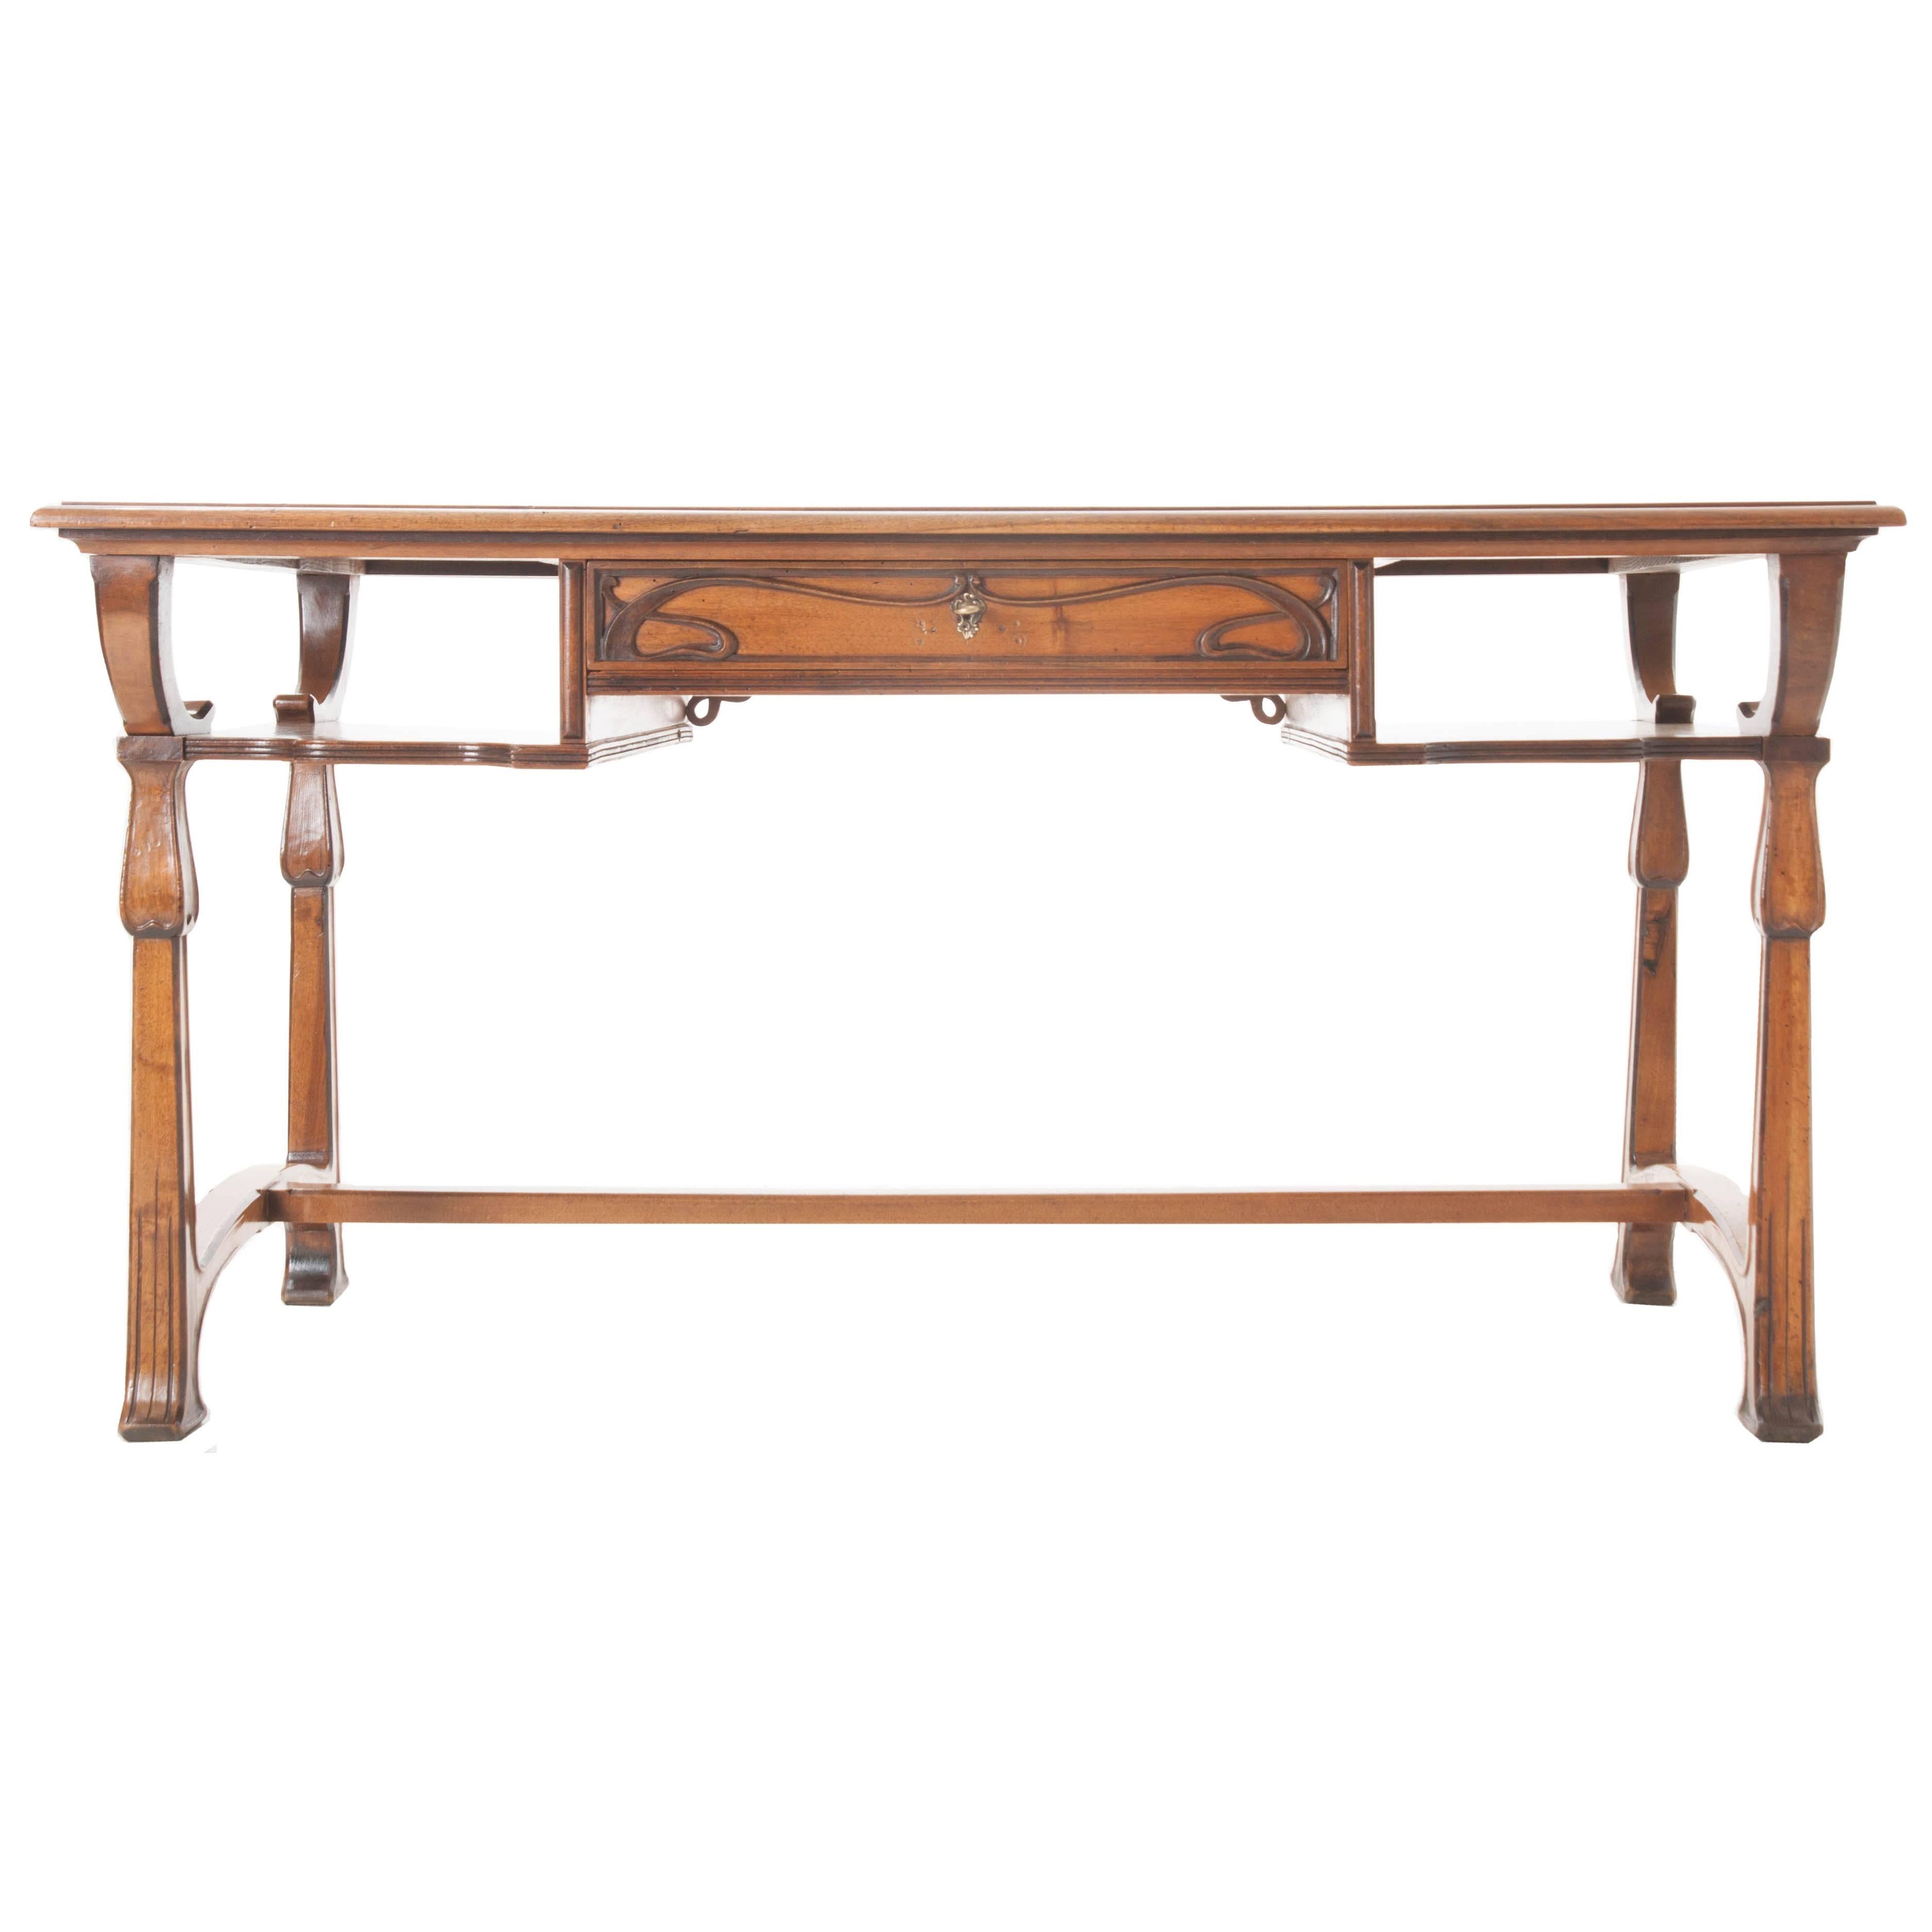 French Early 20th Century Art Nouveau Desk